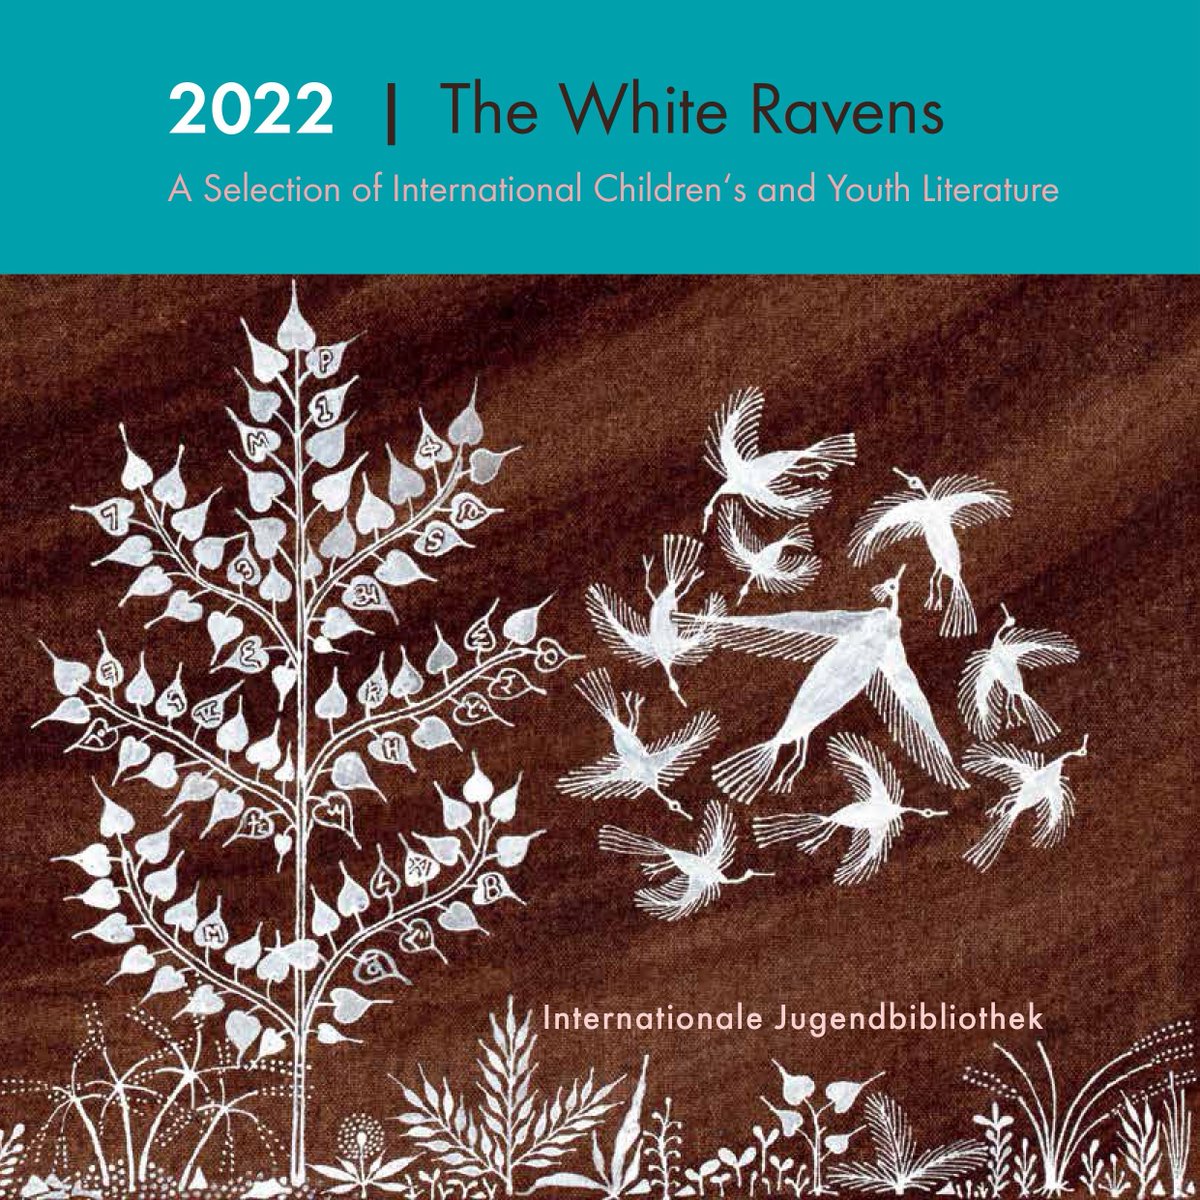 The International Youth Library have published the 2022 White Ravens catalogue. This year’s edition contains 200 titles from 53 countries in 37 languages. booksforkeeps.co.uk/the-2022-white…